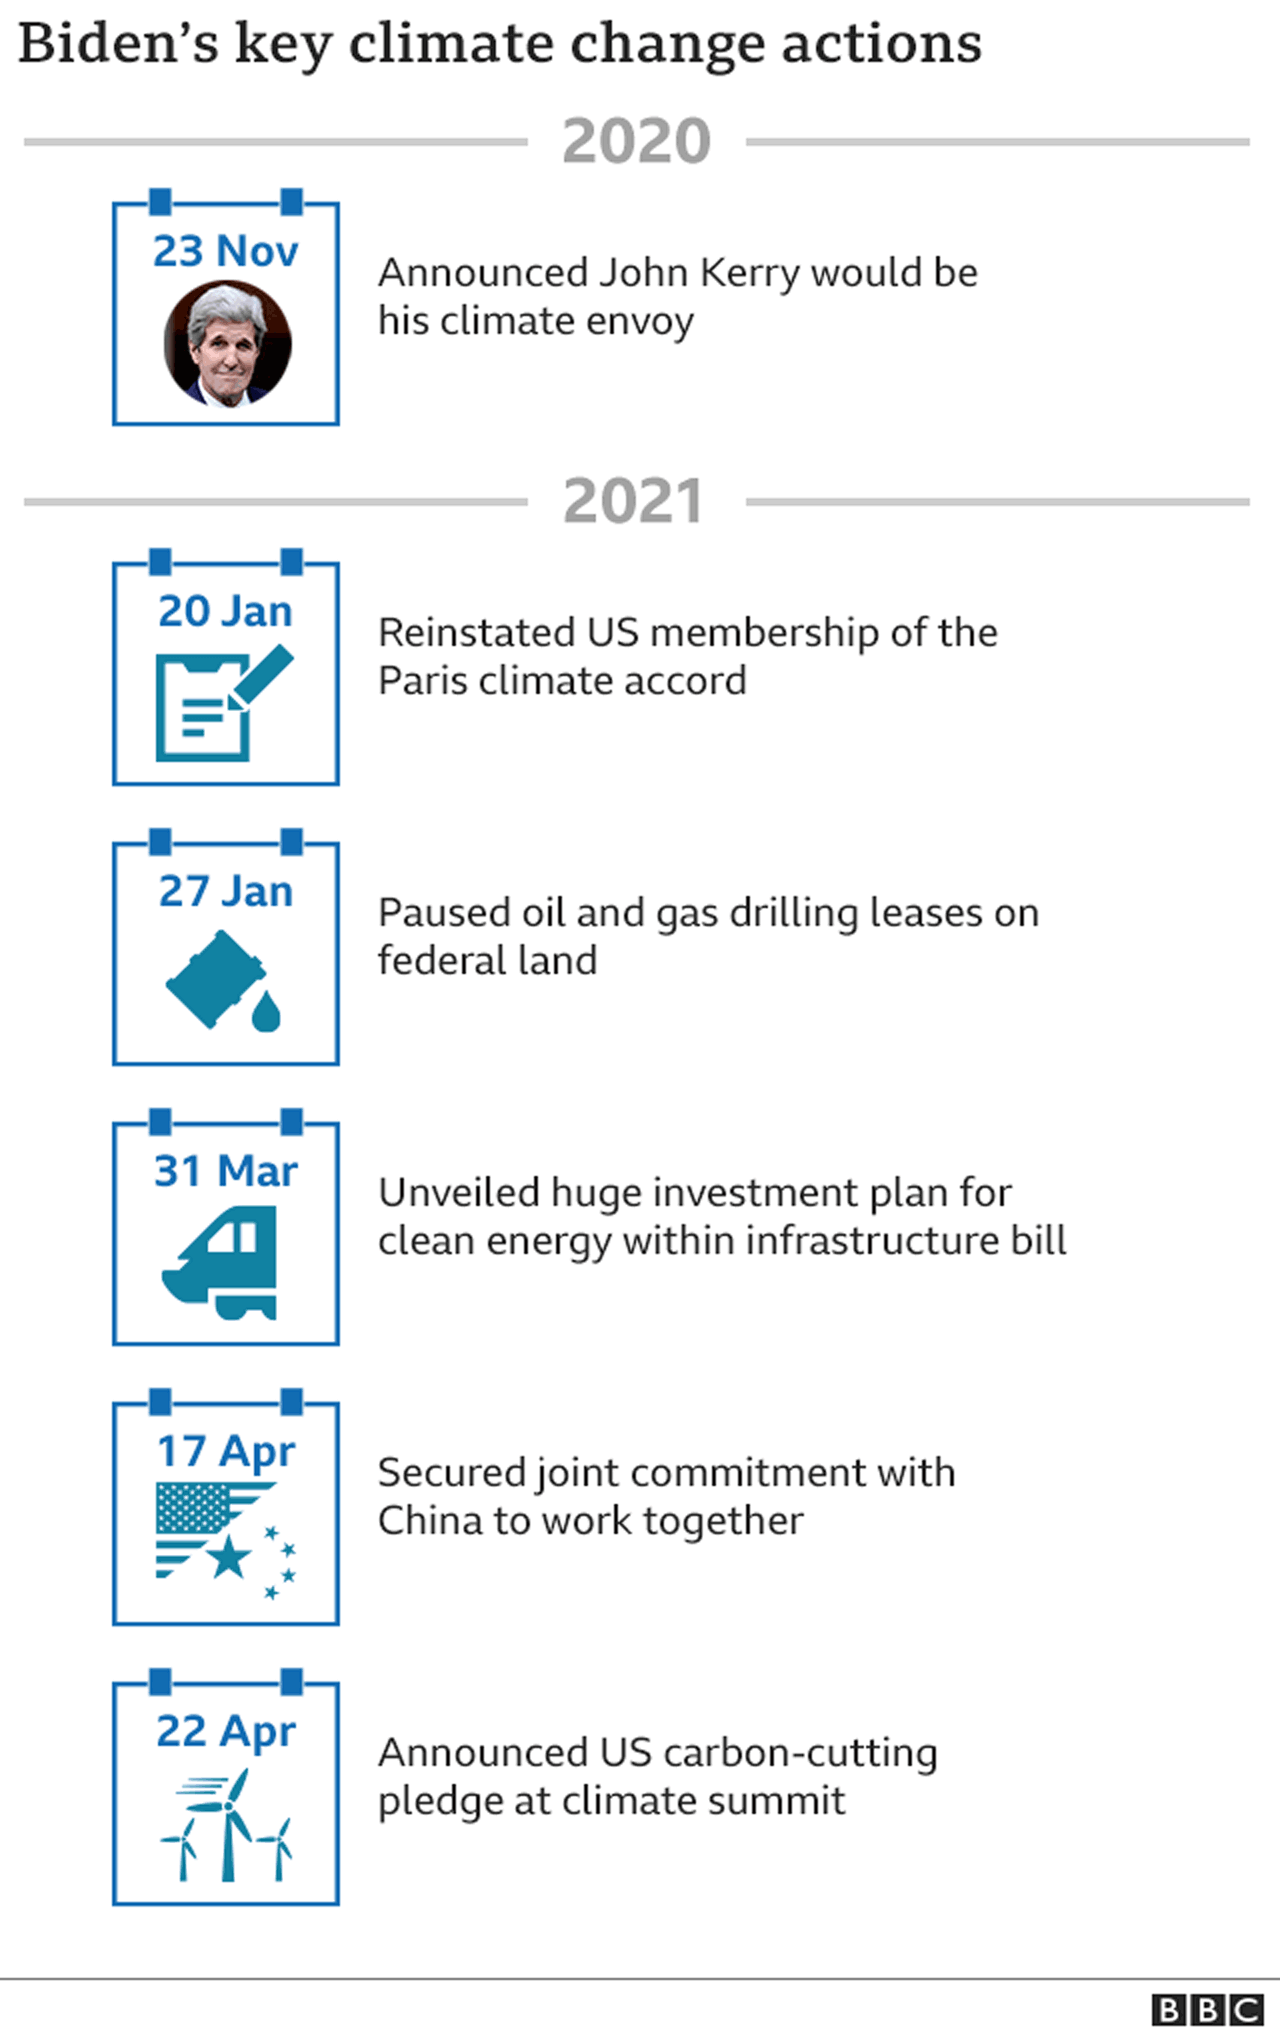 Graphic showing a timeline of key actions on climate change by President Biden